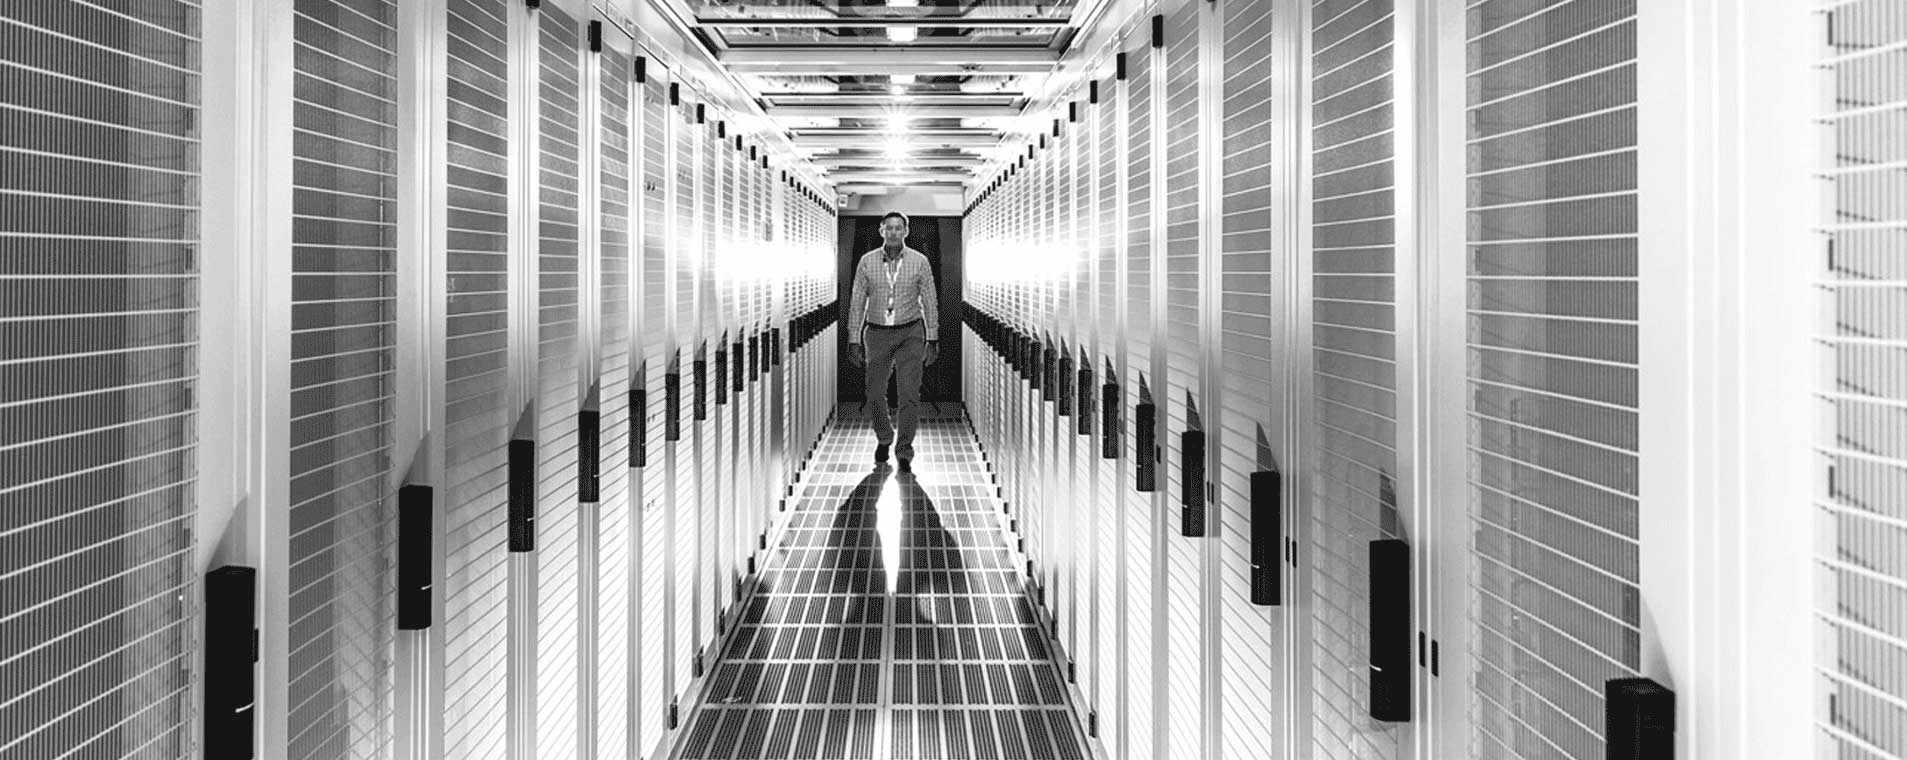 Macquarie Technology Group investors colocation cloud hosting, voice, data and mobile experts